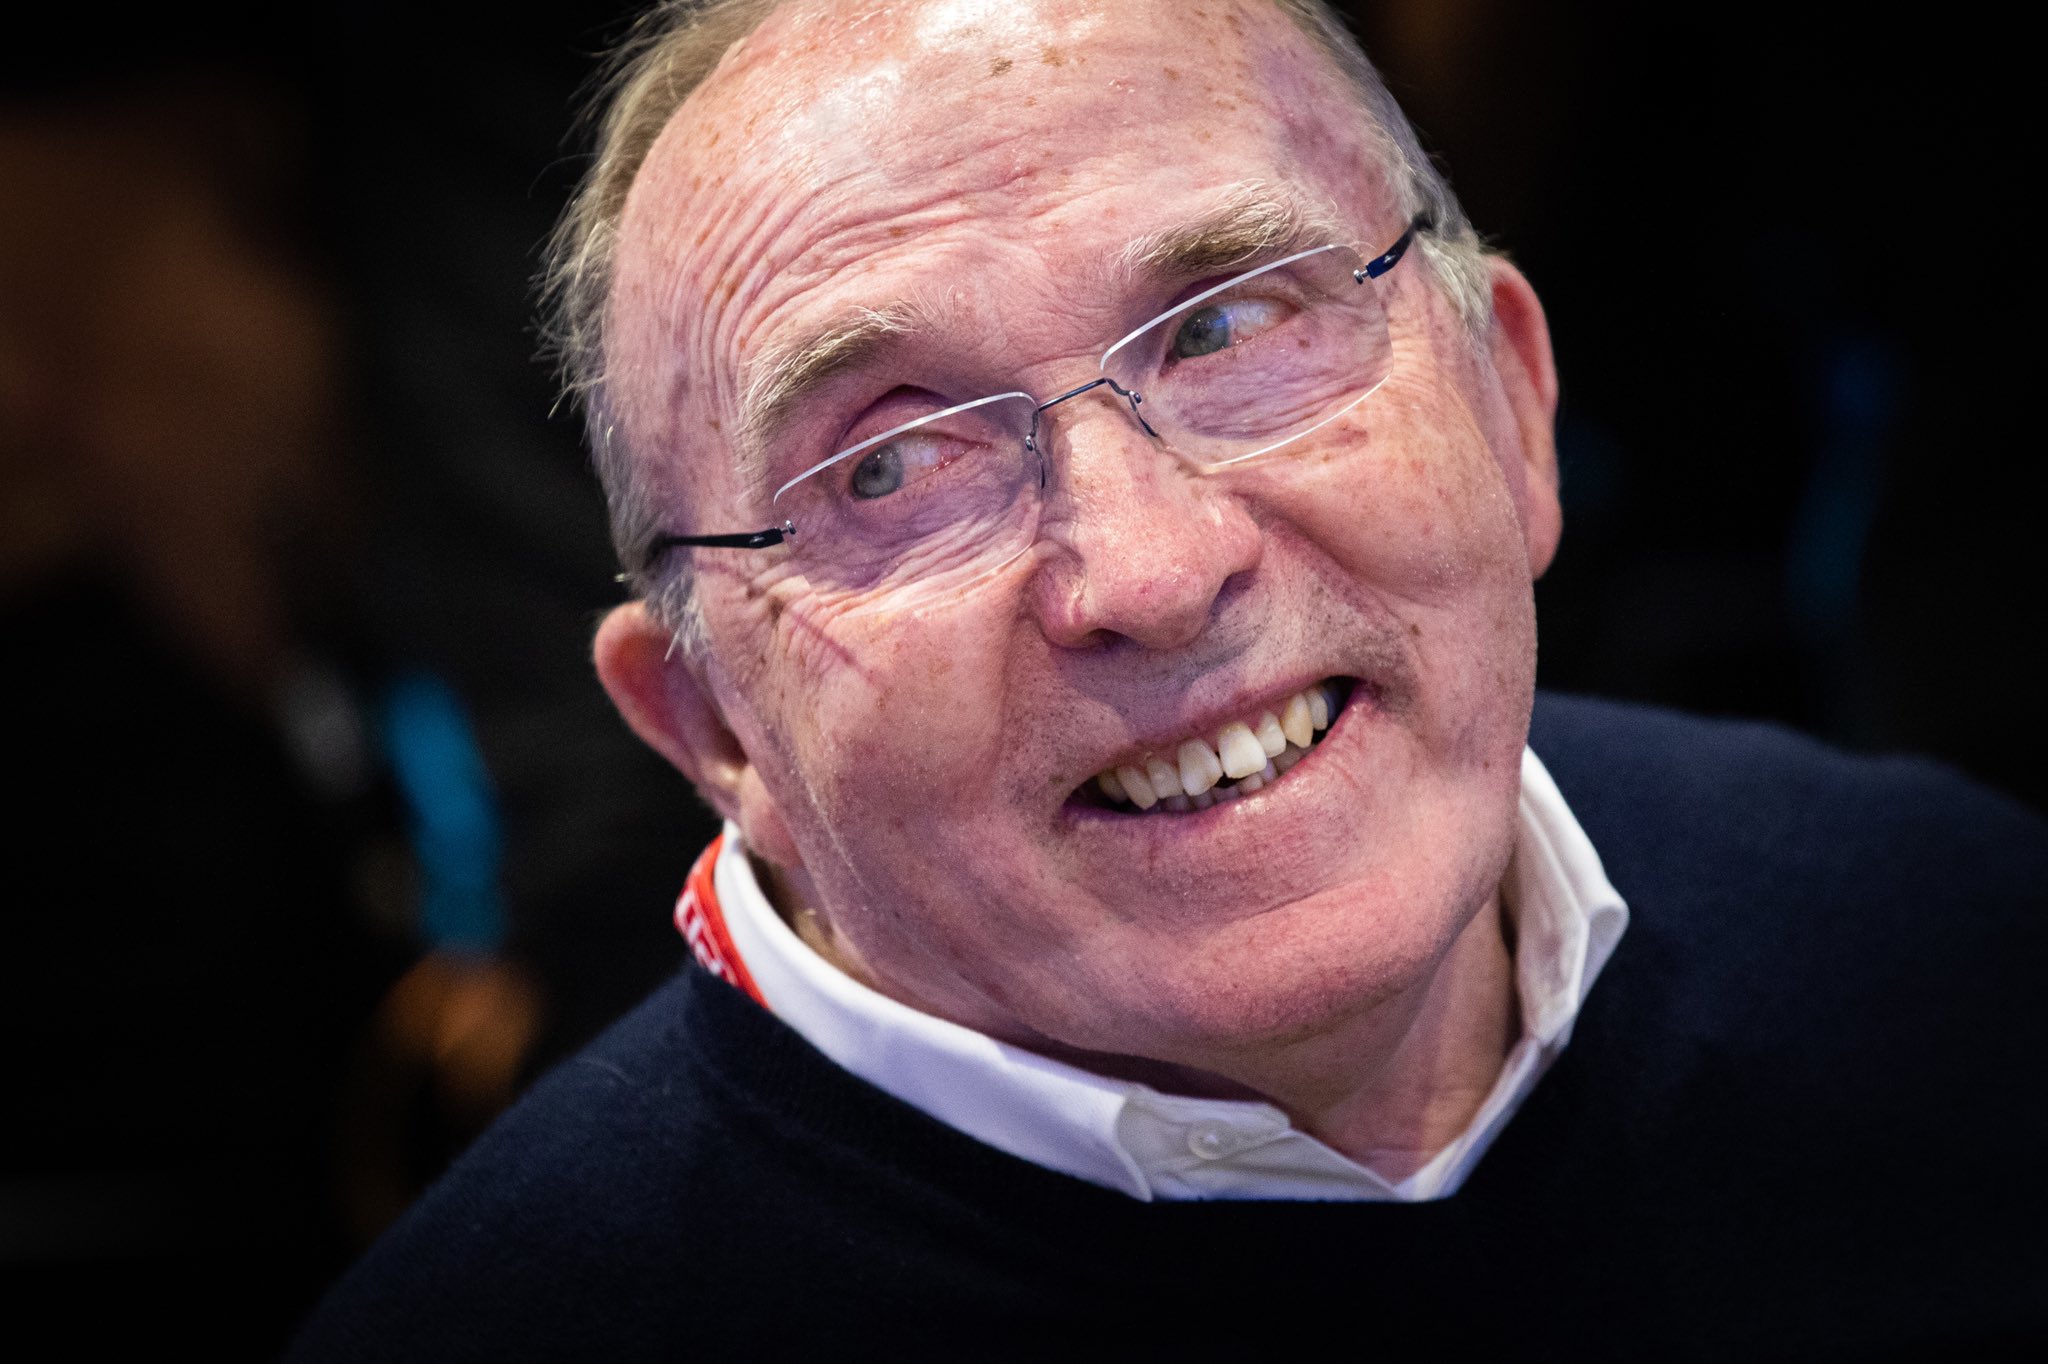  Happy birthday to Sir Frank Williams who turns 79 today!  